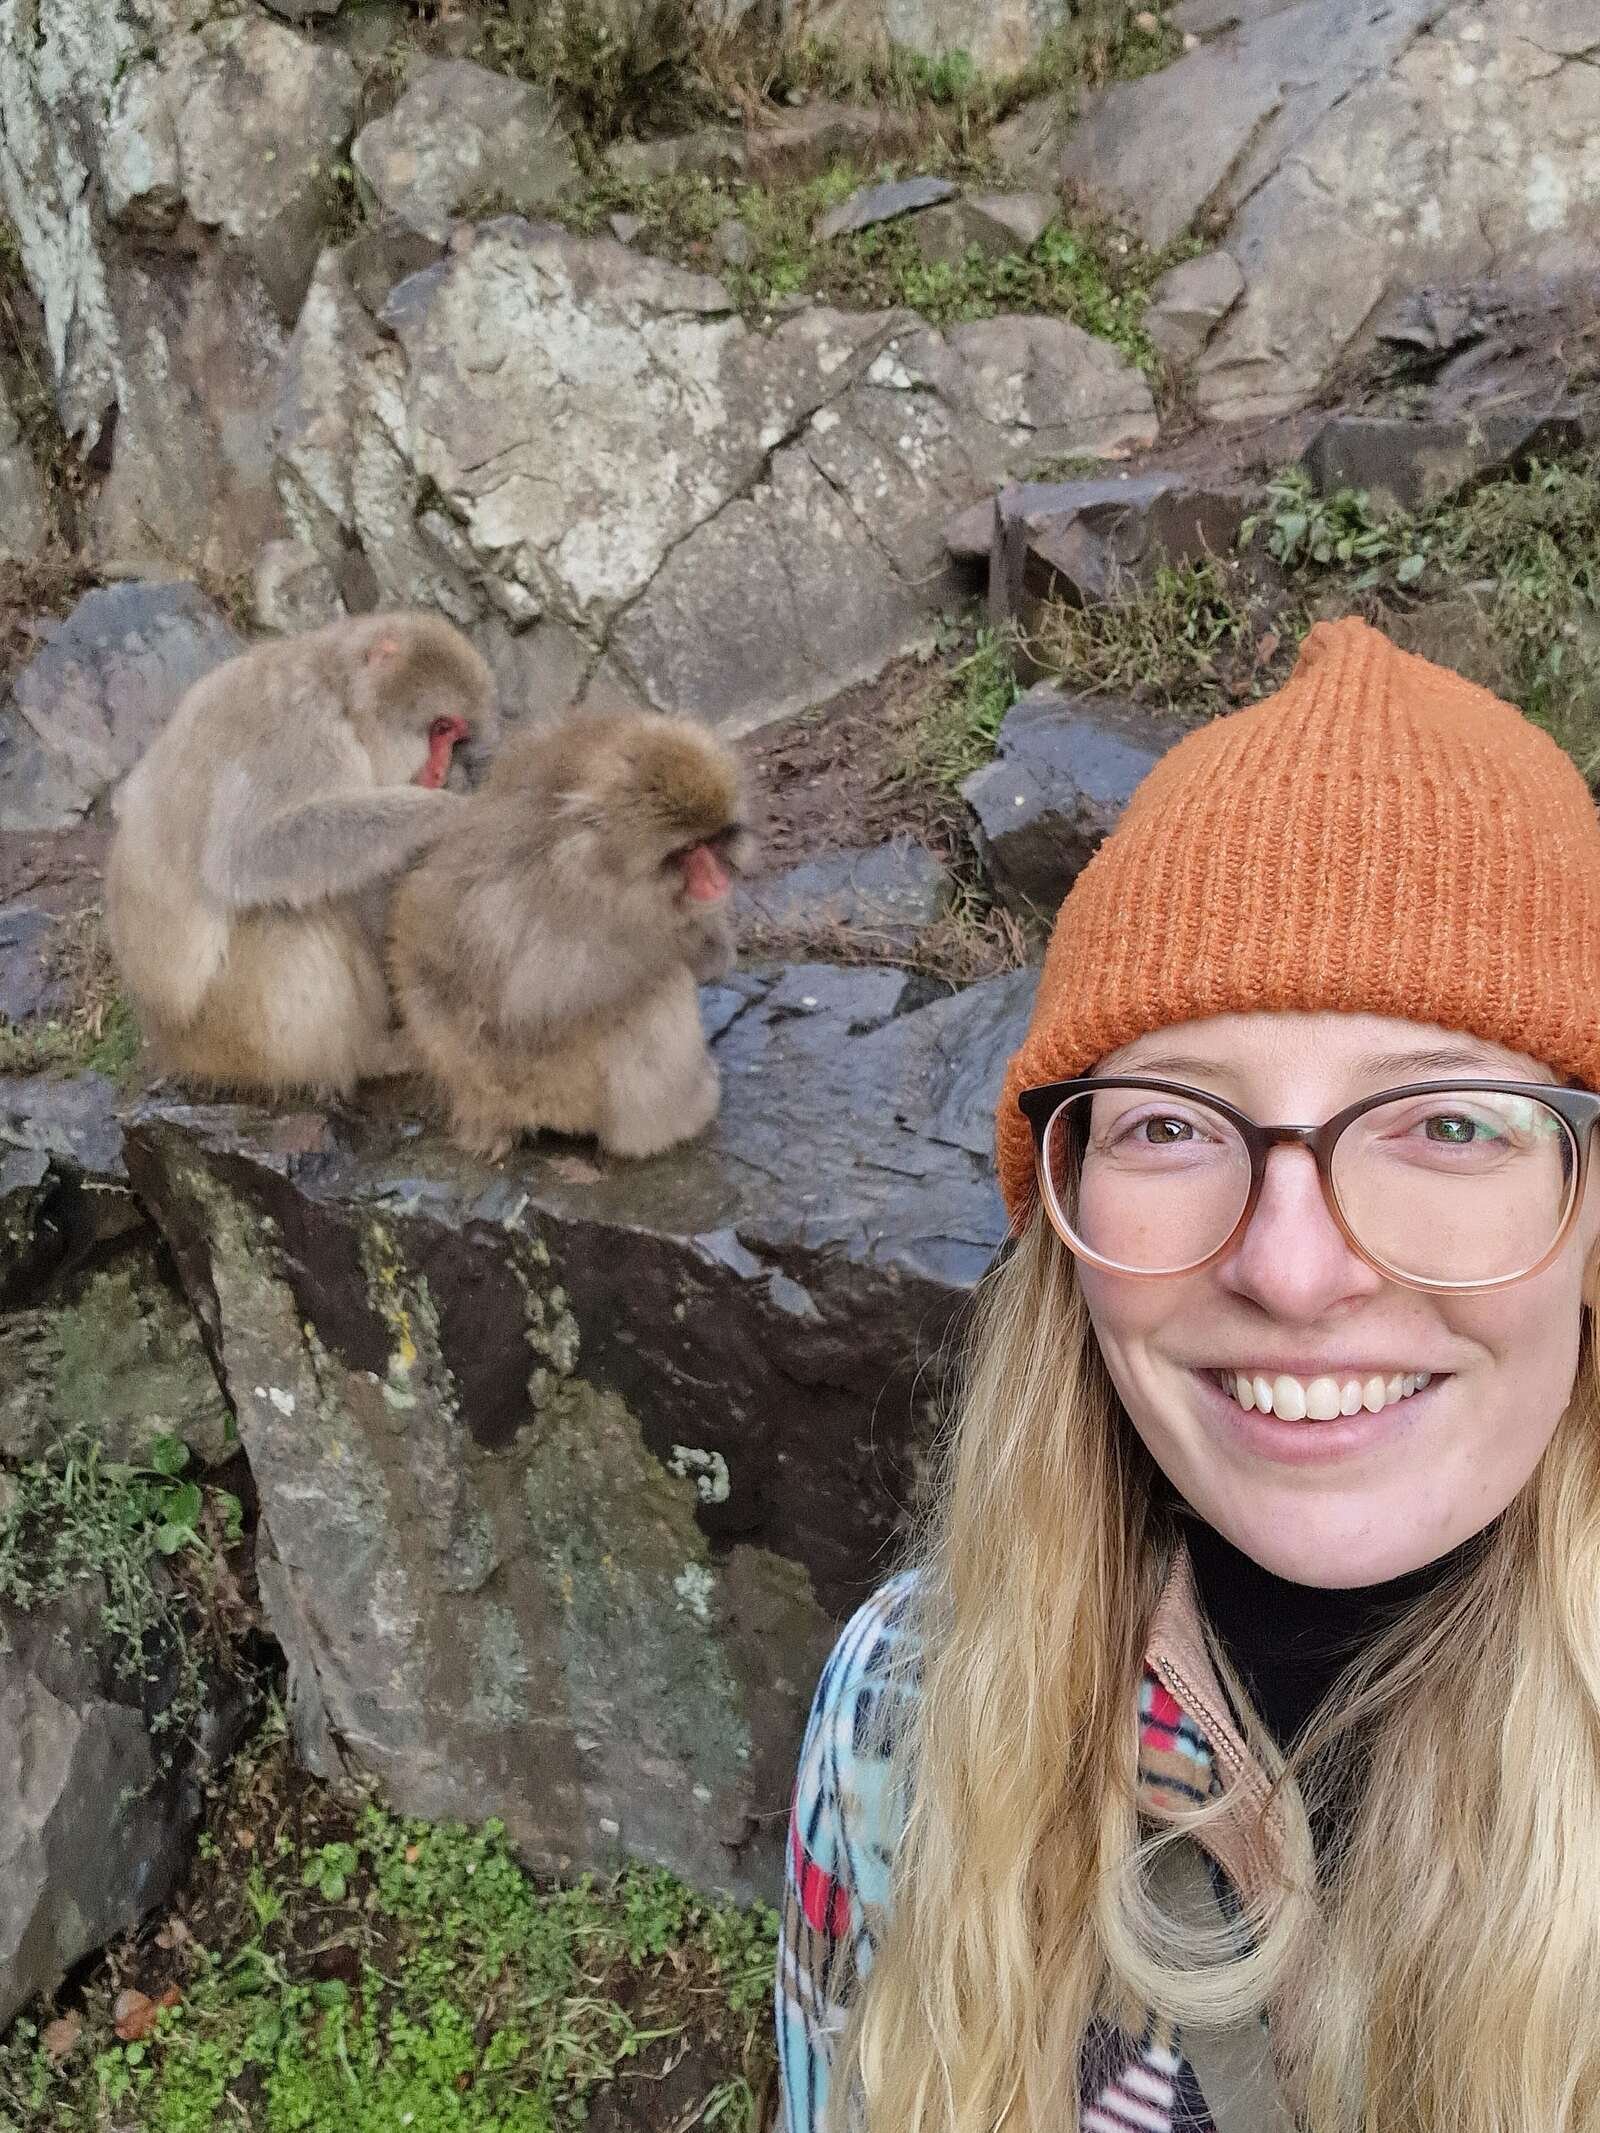 Helena having a selfie with two japanese snow monkeys who are cleaning each other